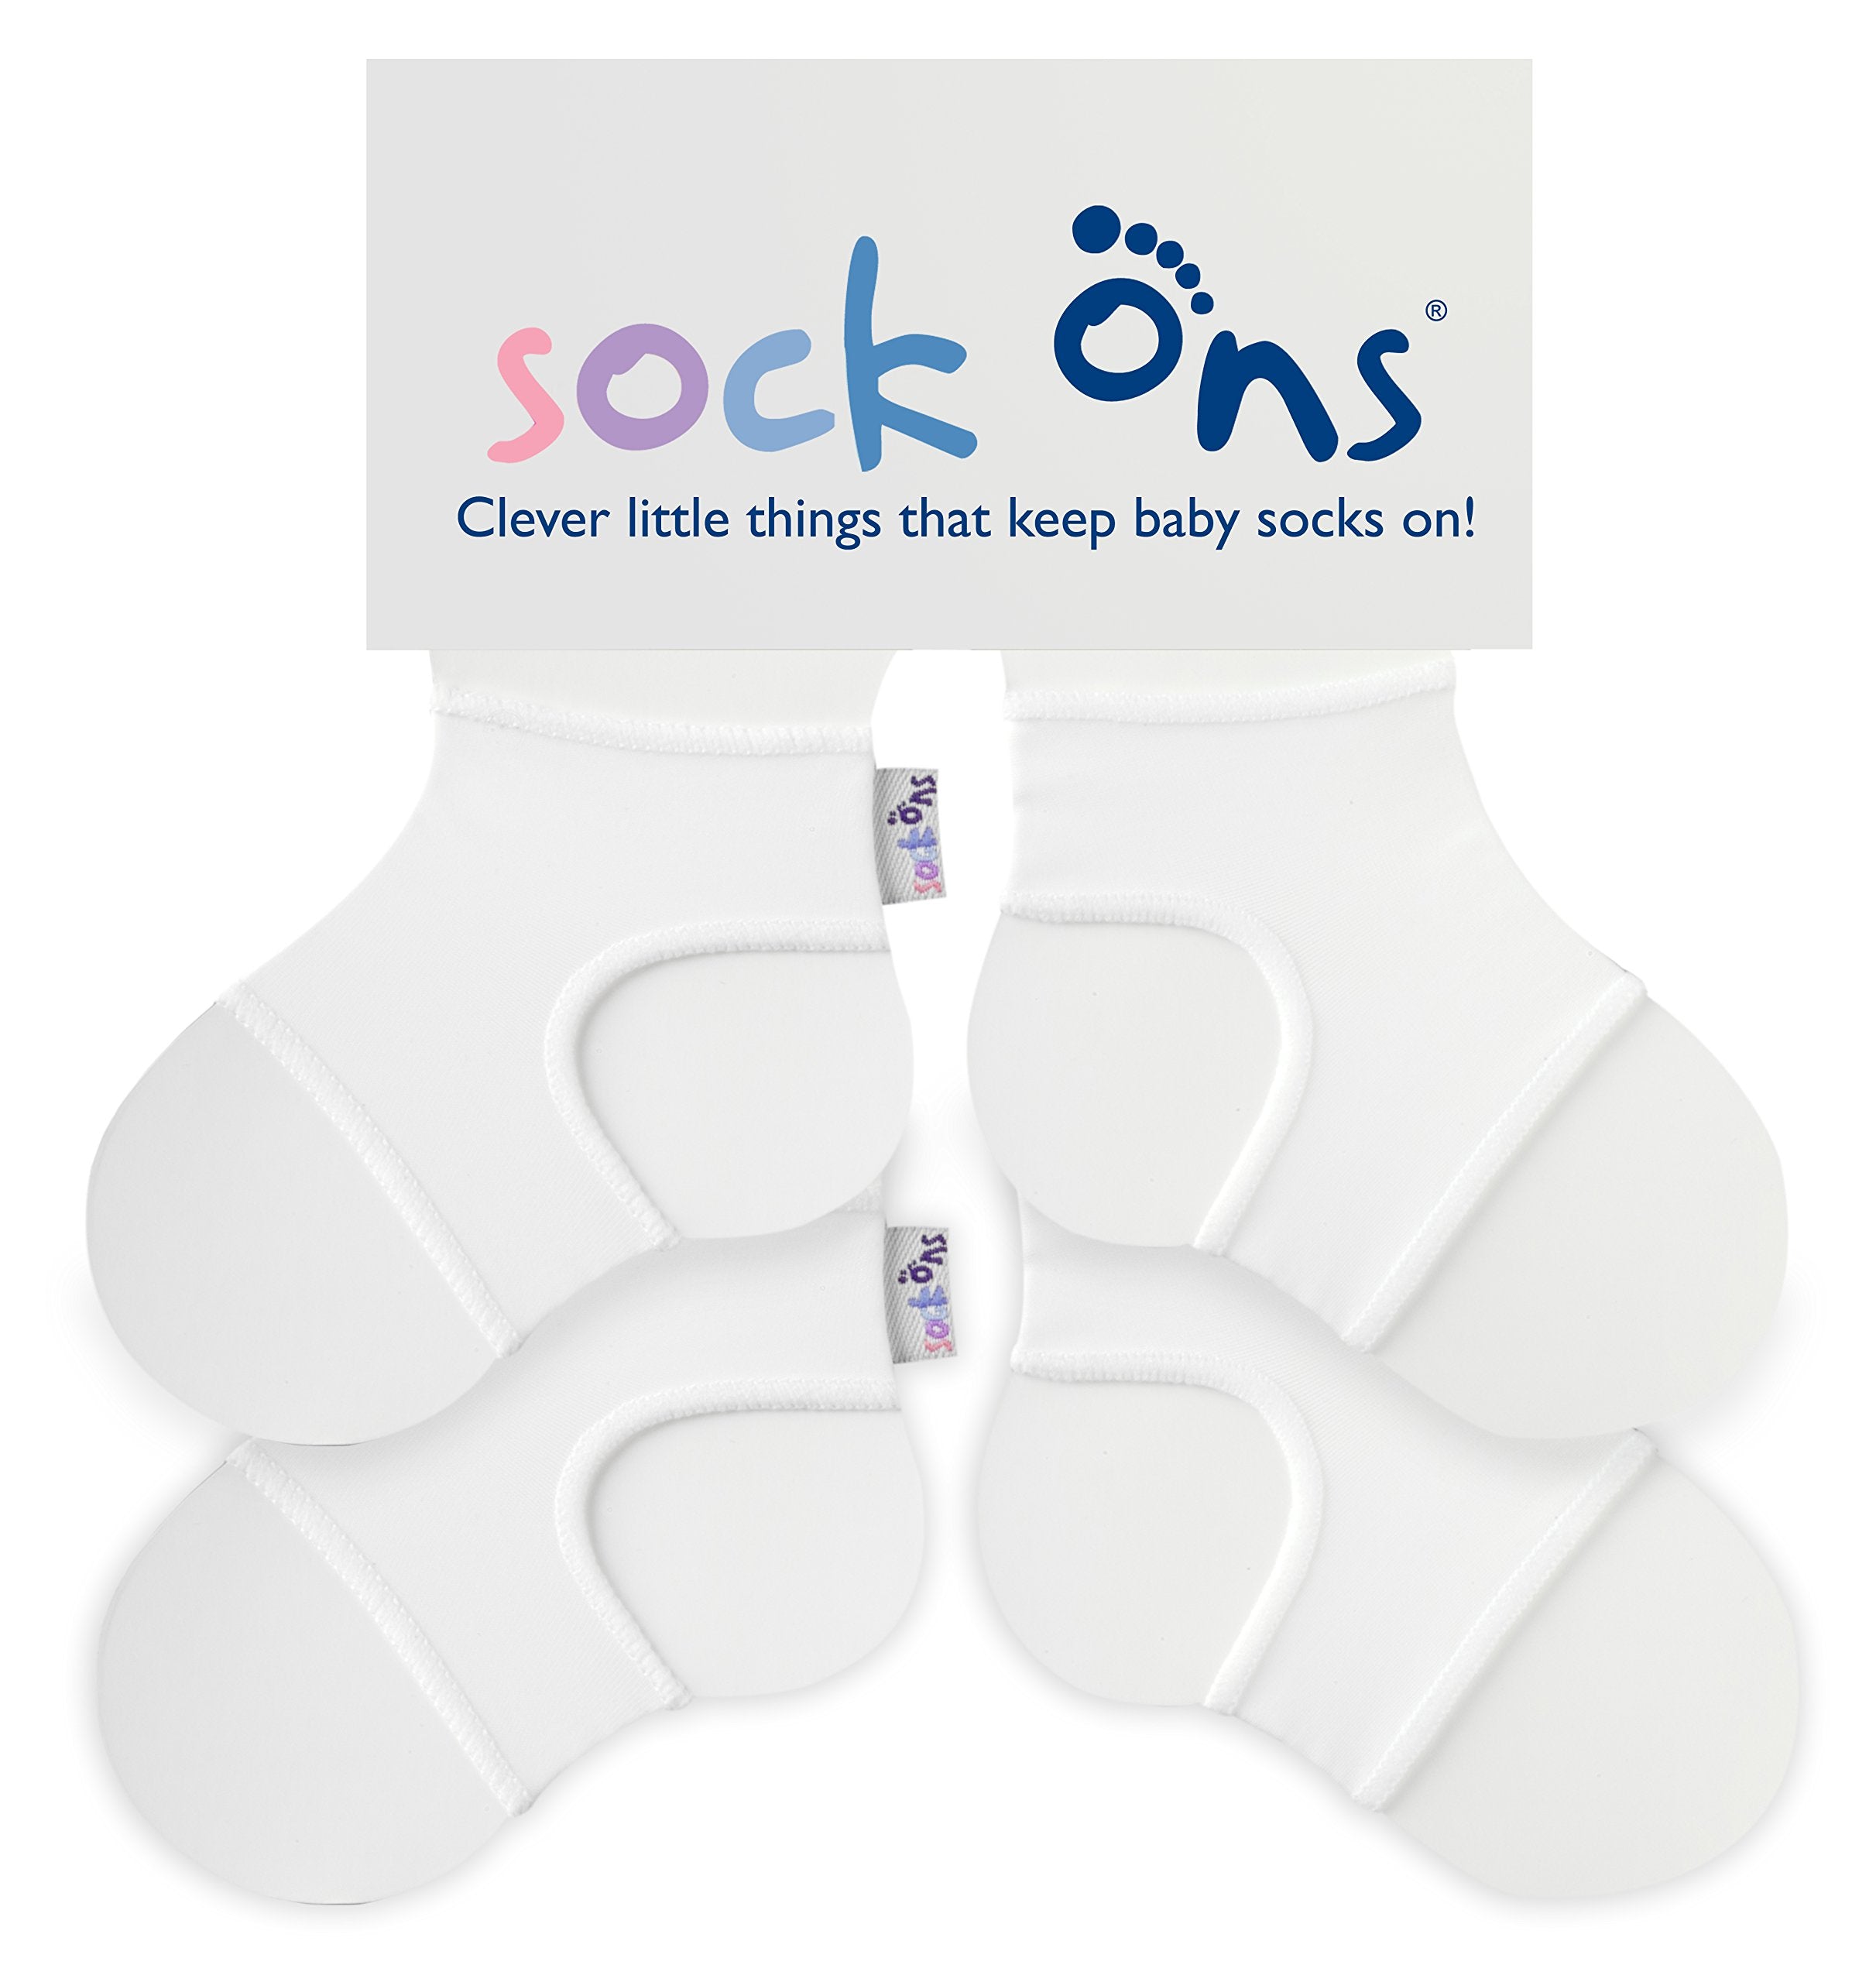 Sock Ons Clever Little Things That Keep Baby Socks On! - 6-12 Months - TWIN PACKS (2 pack)